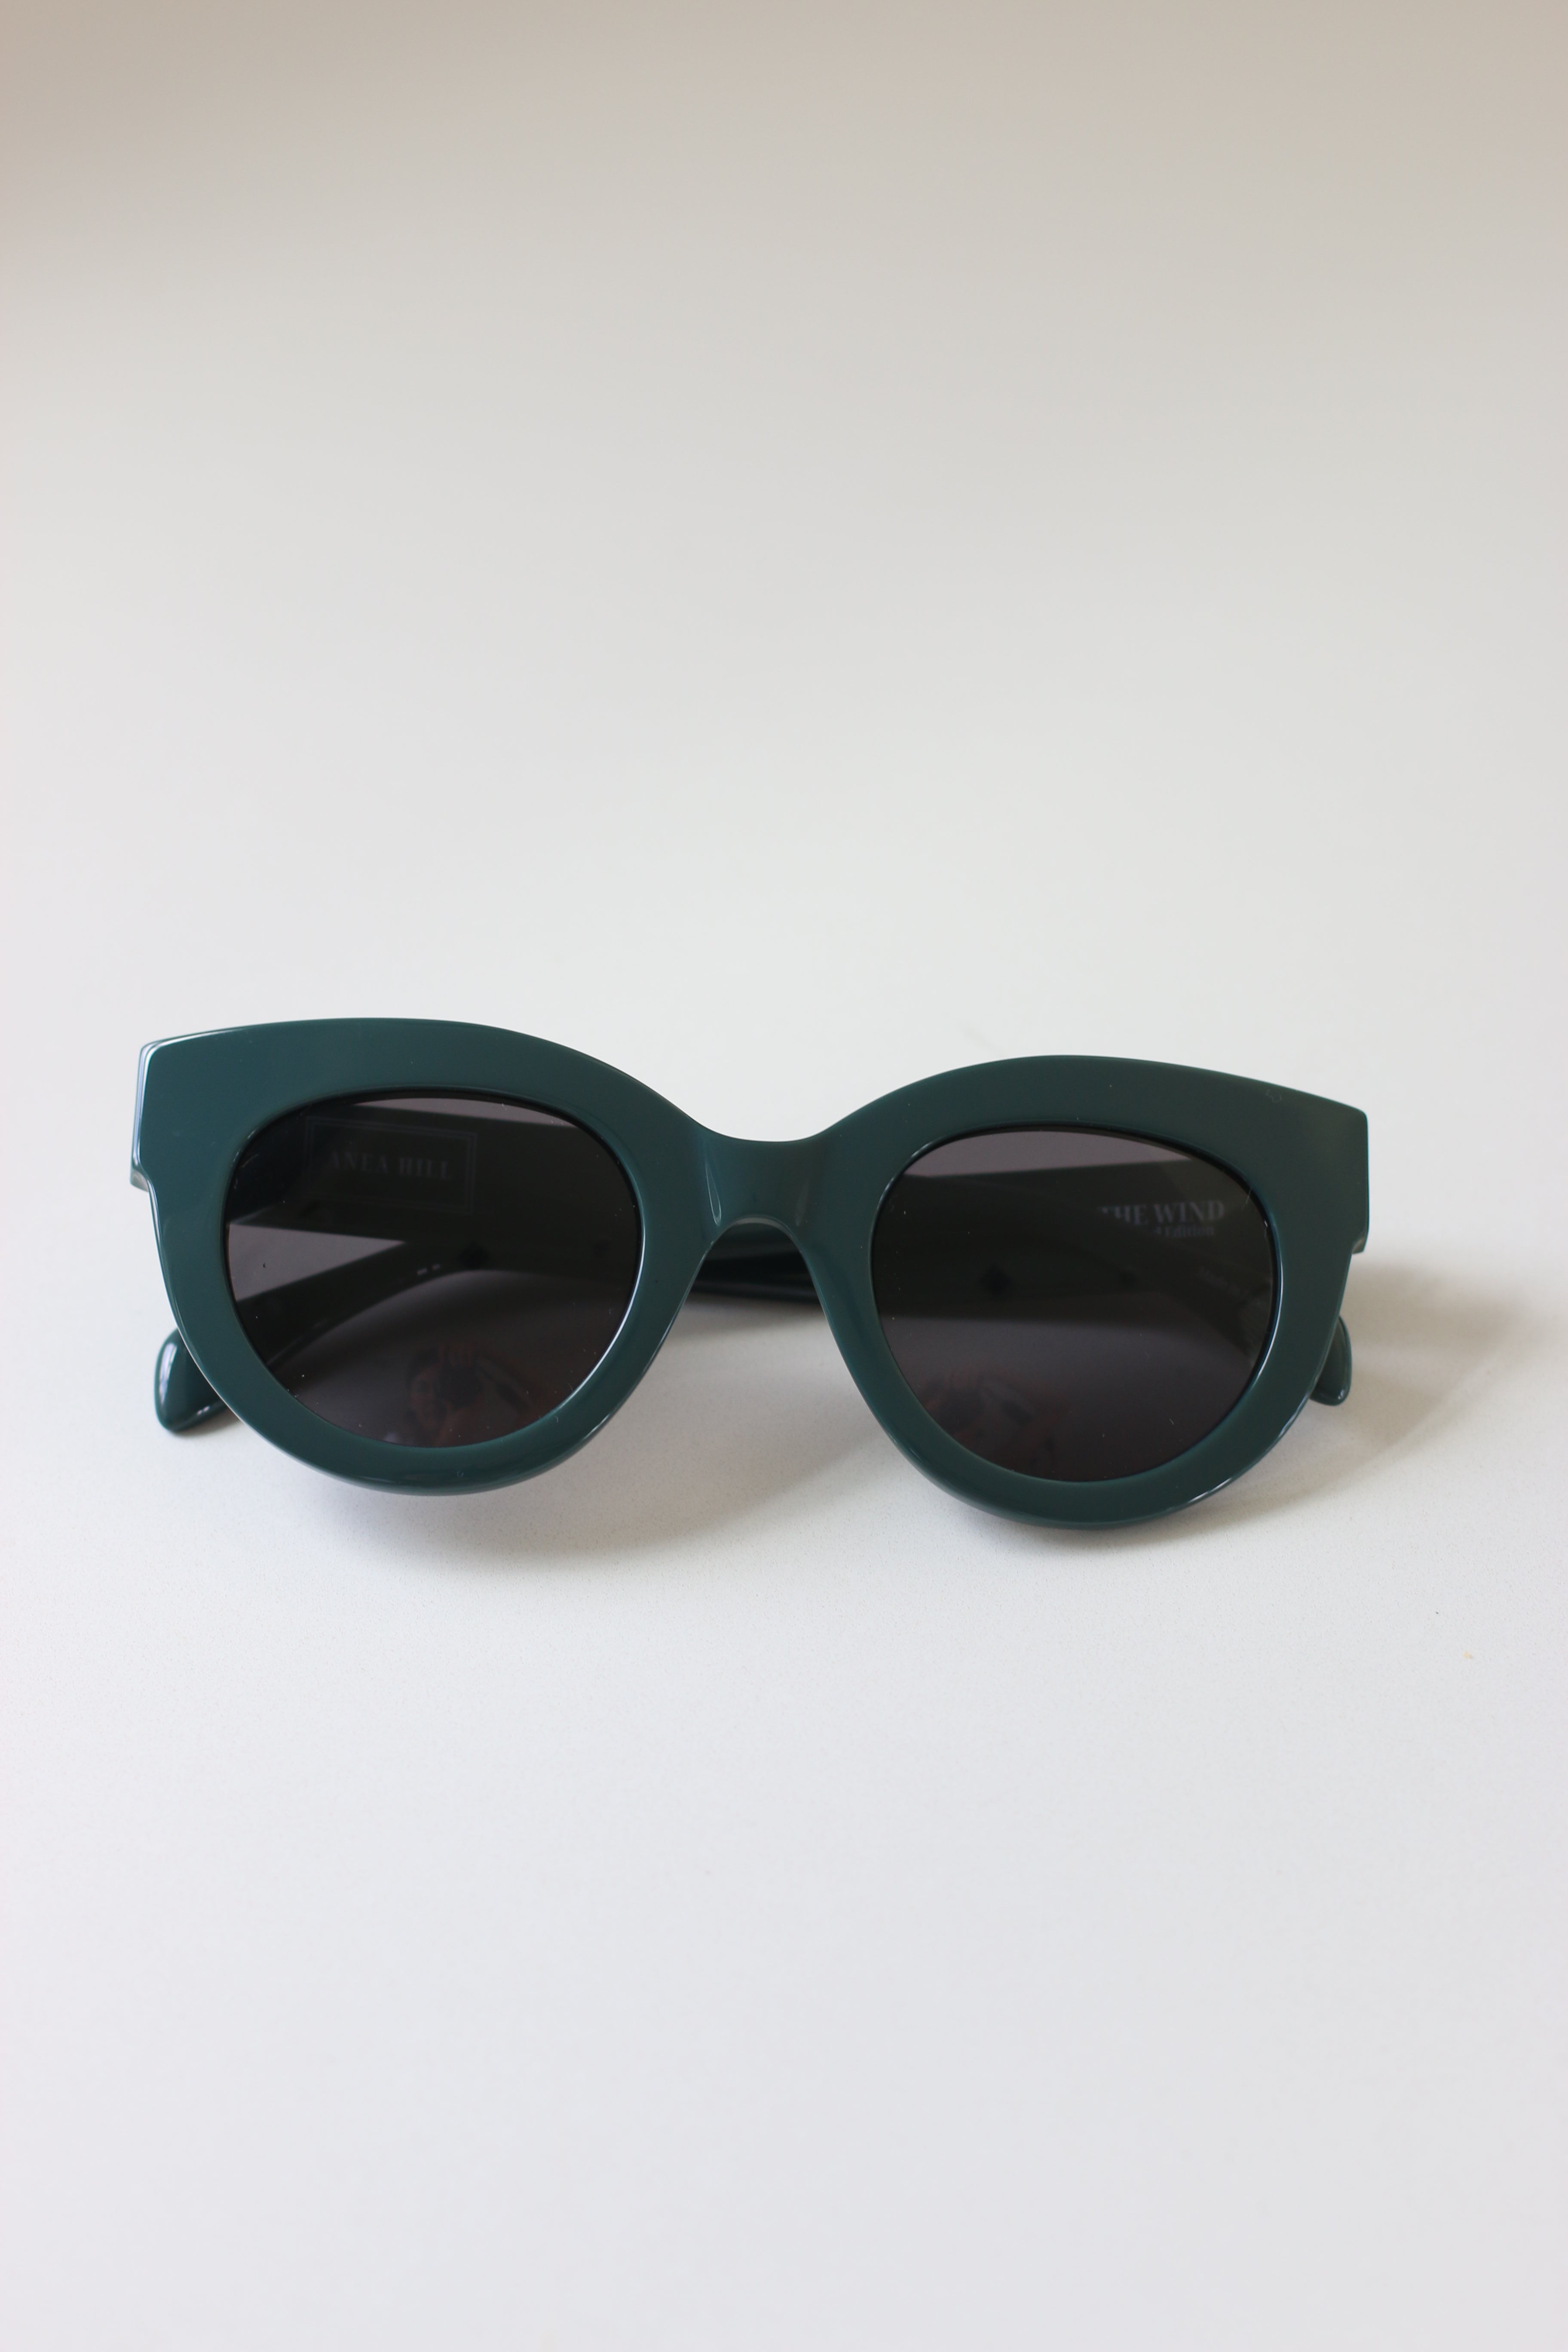 ANEA HILL The Wind is back! Handcrafted green acetate sunglasses with polarized lenses for timeless style.